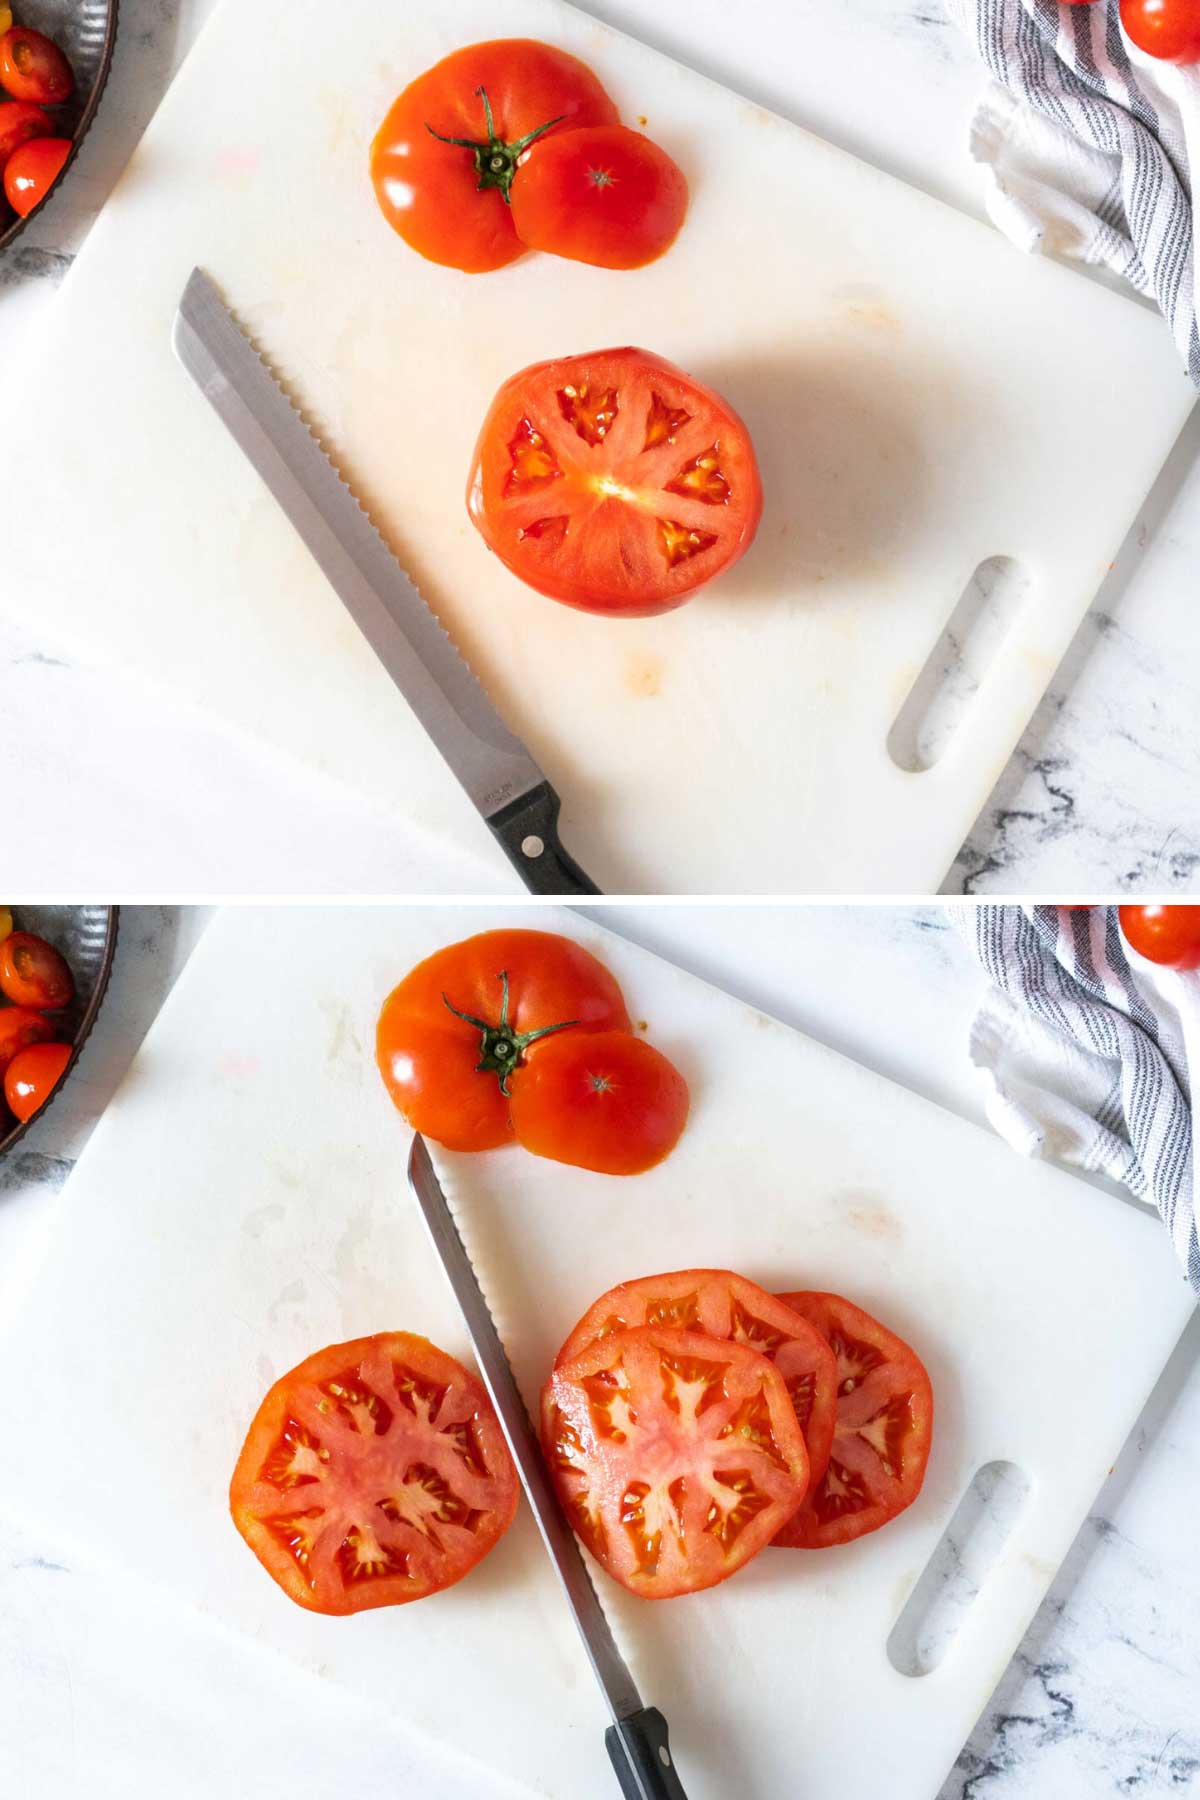 Slicing tomatoes with a bread knife.